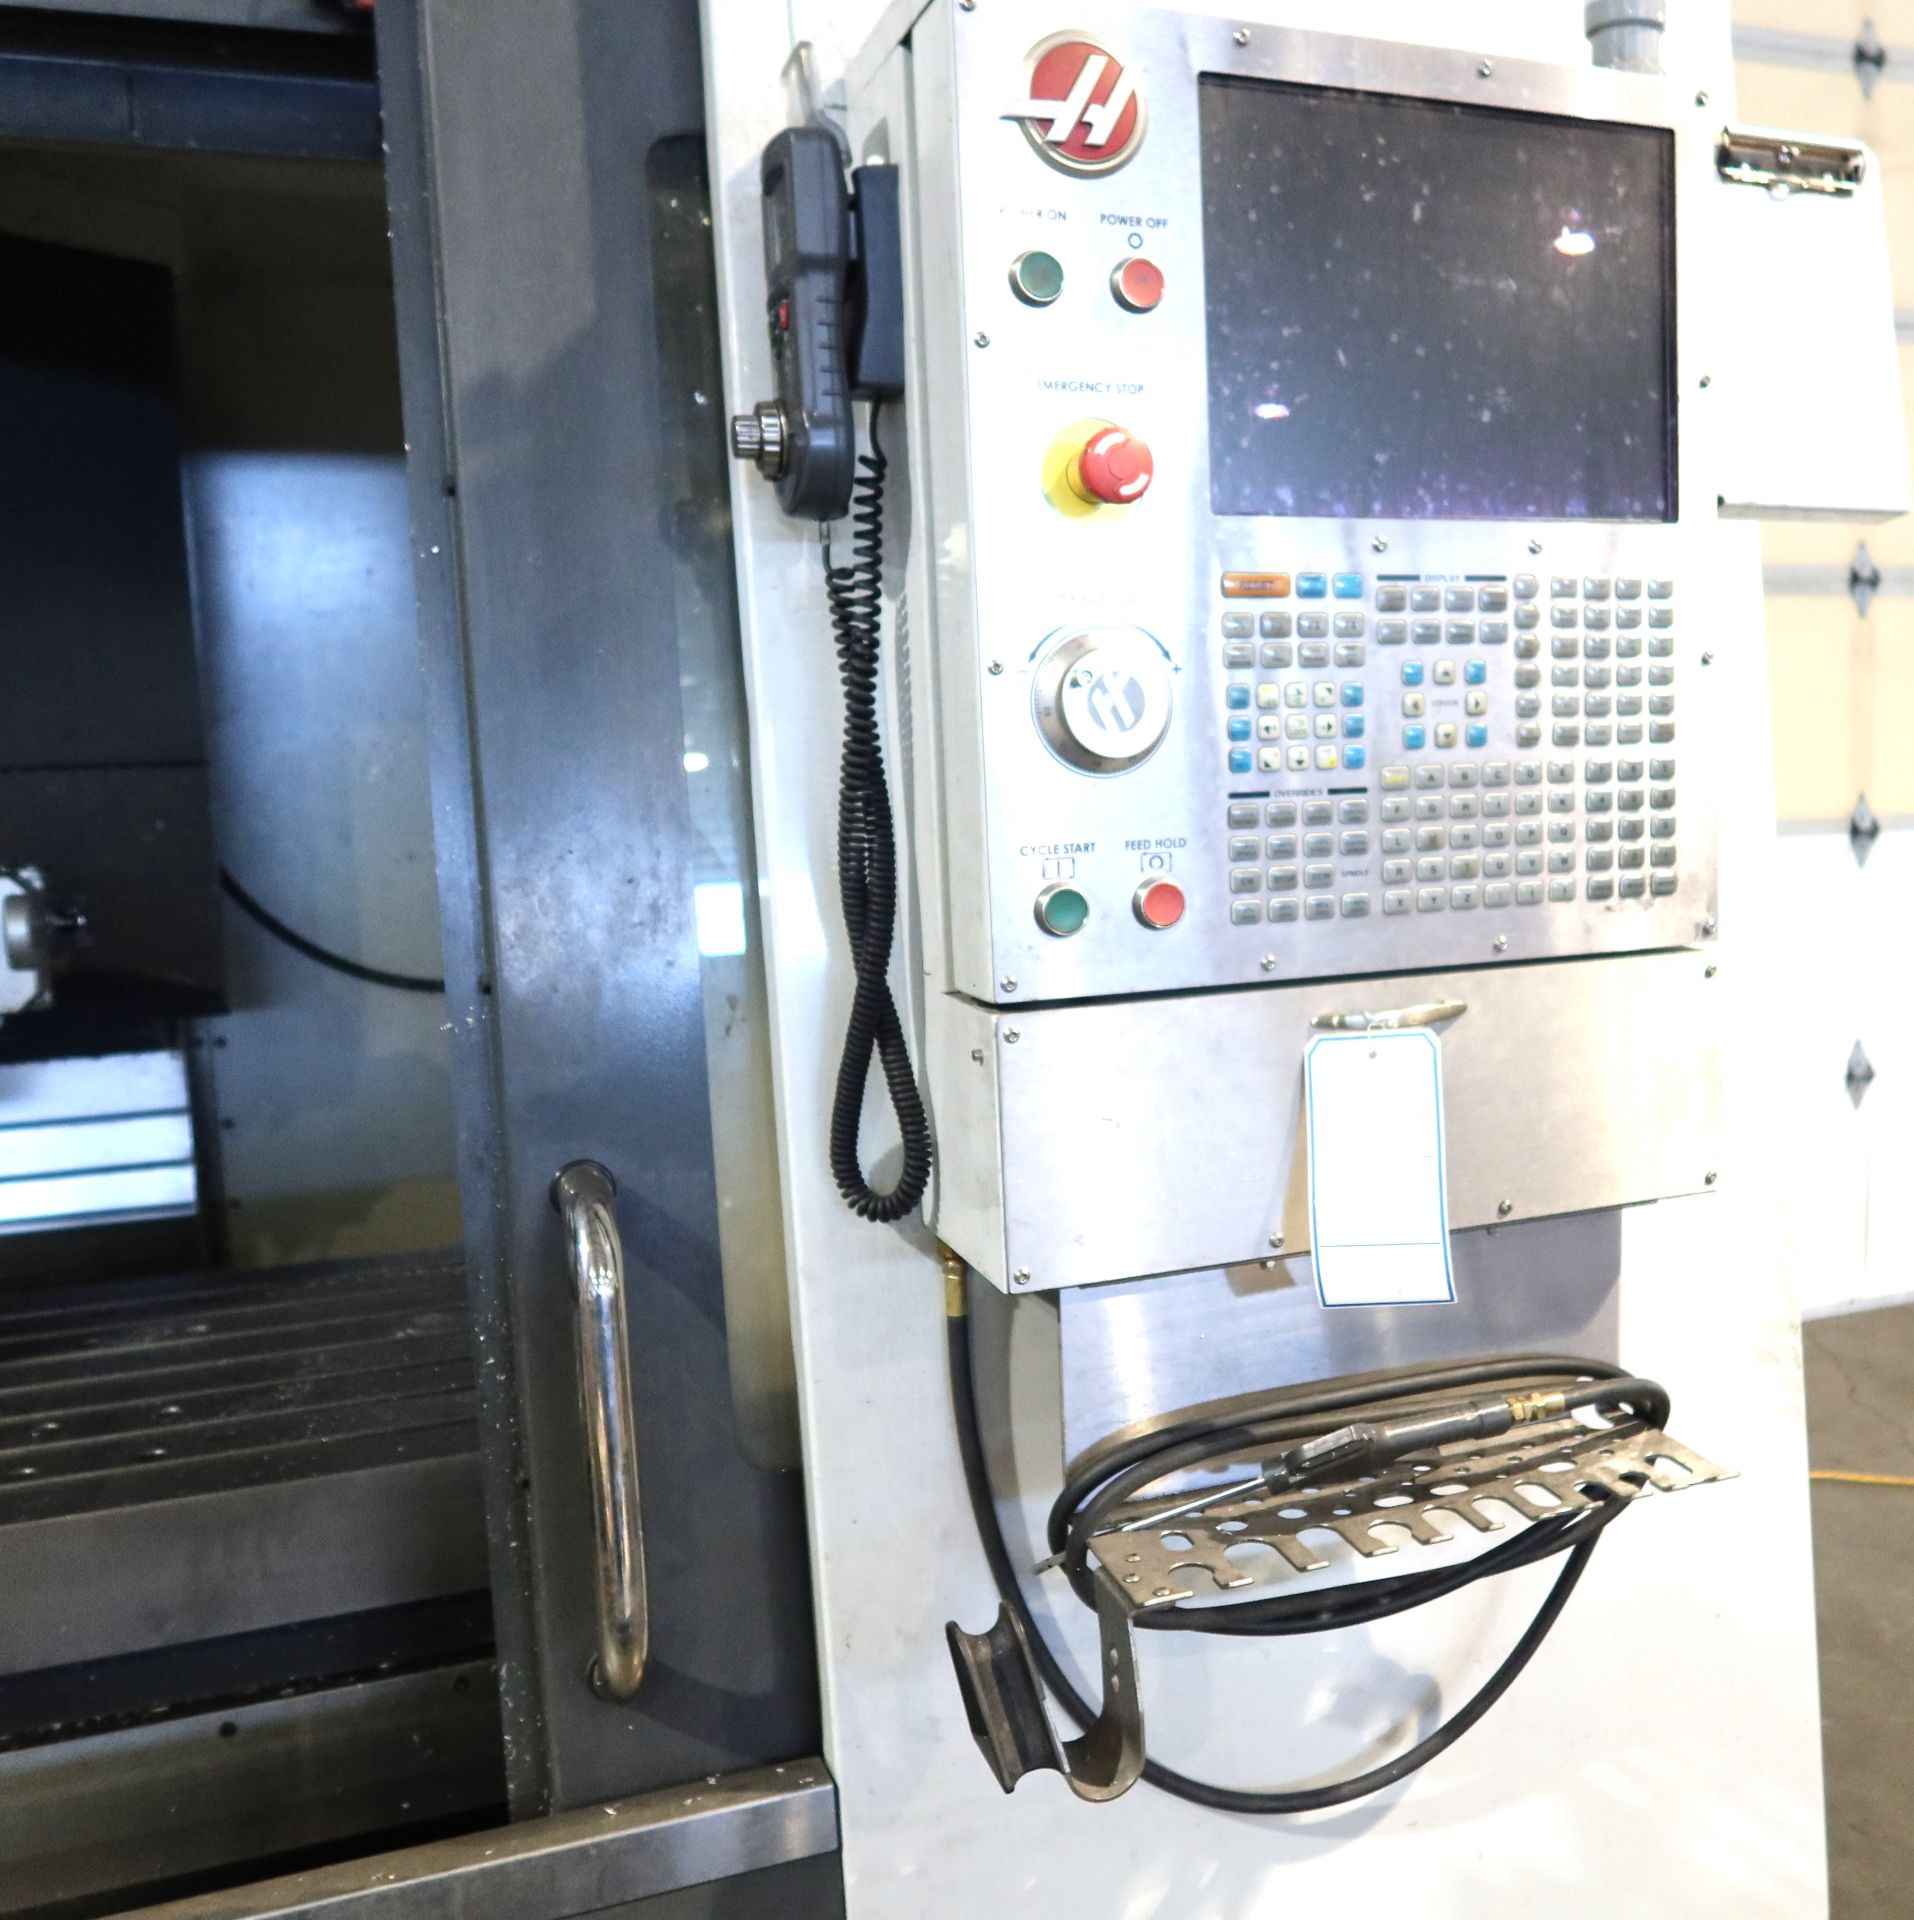 HAAS VF3-YT CNC 4-AXIS PRECISION VERTICAL MACHINING CENTER, S/N 1124918, NEW 2015 - Image 2 of 12